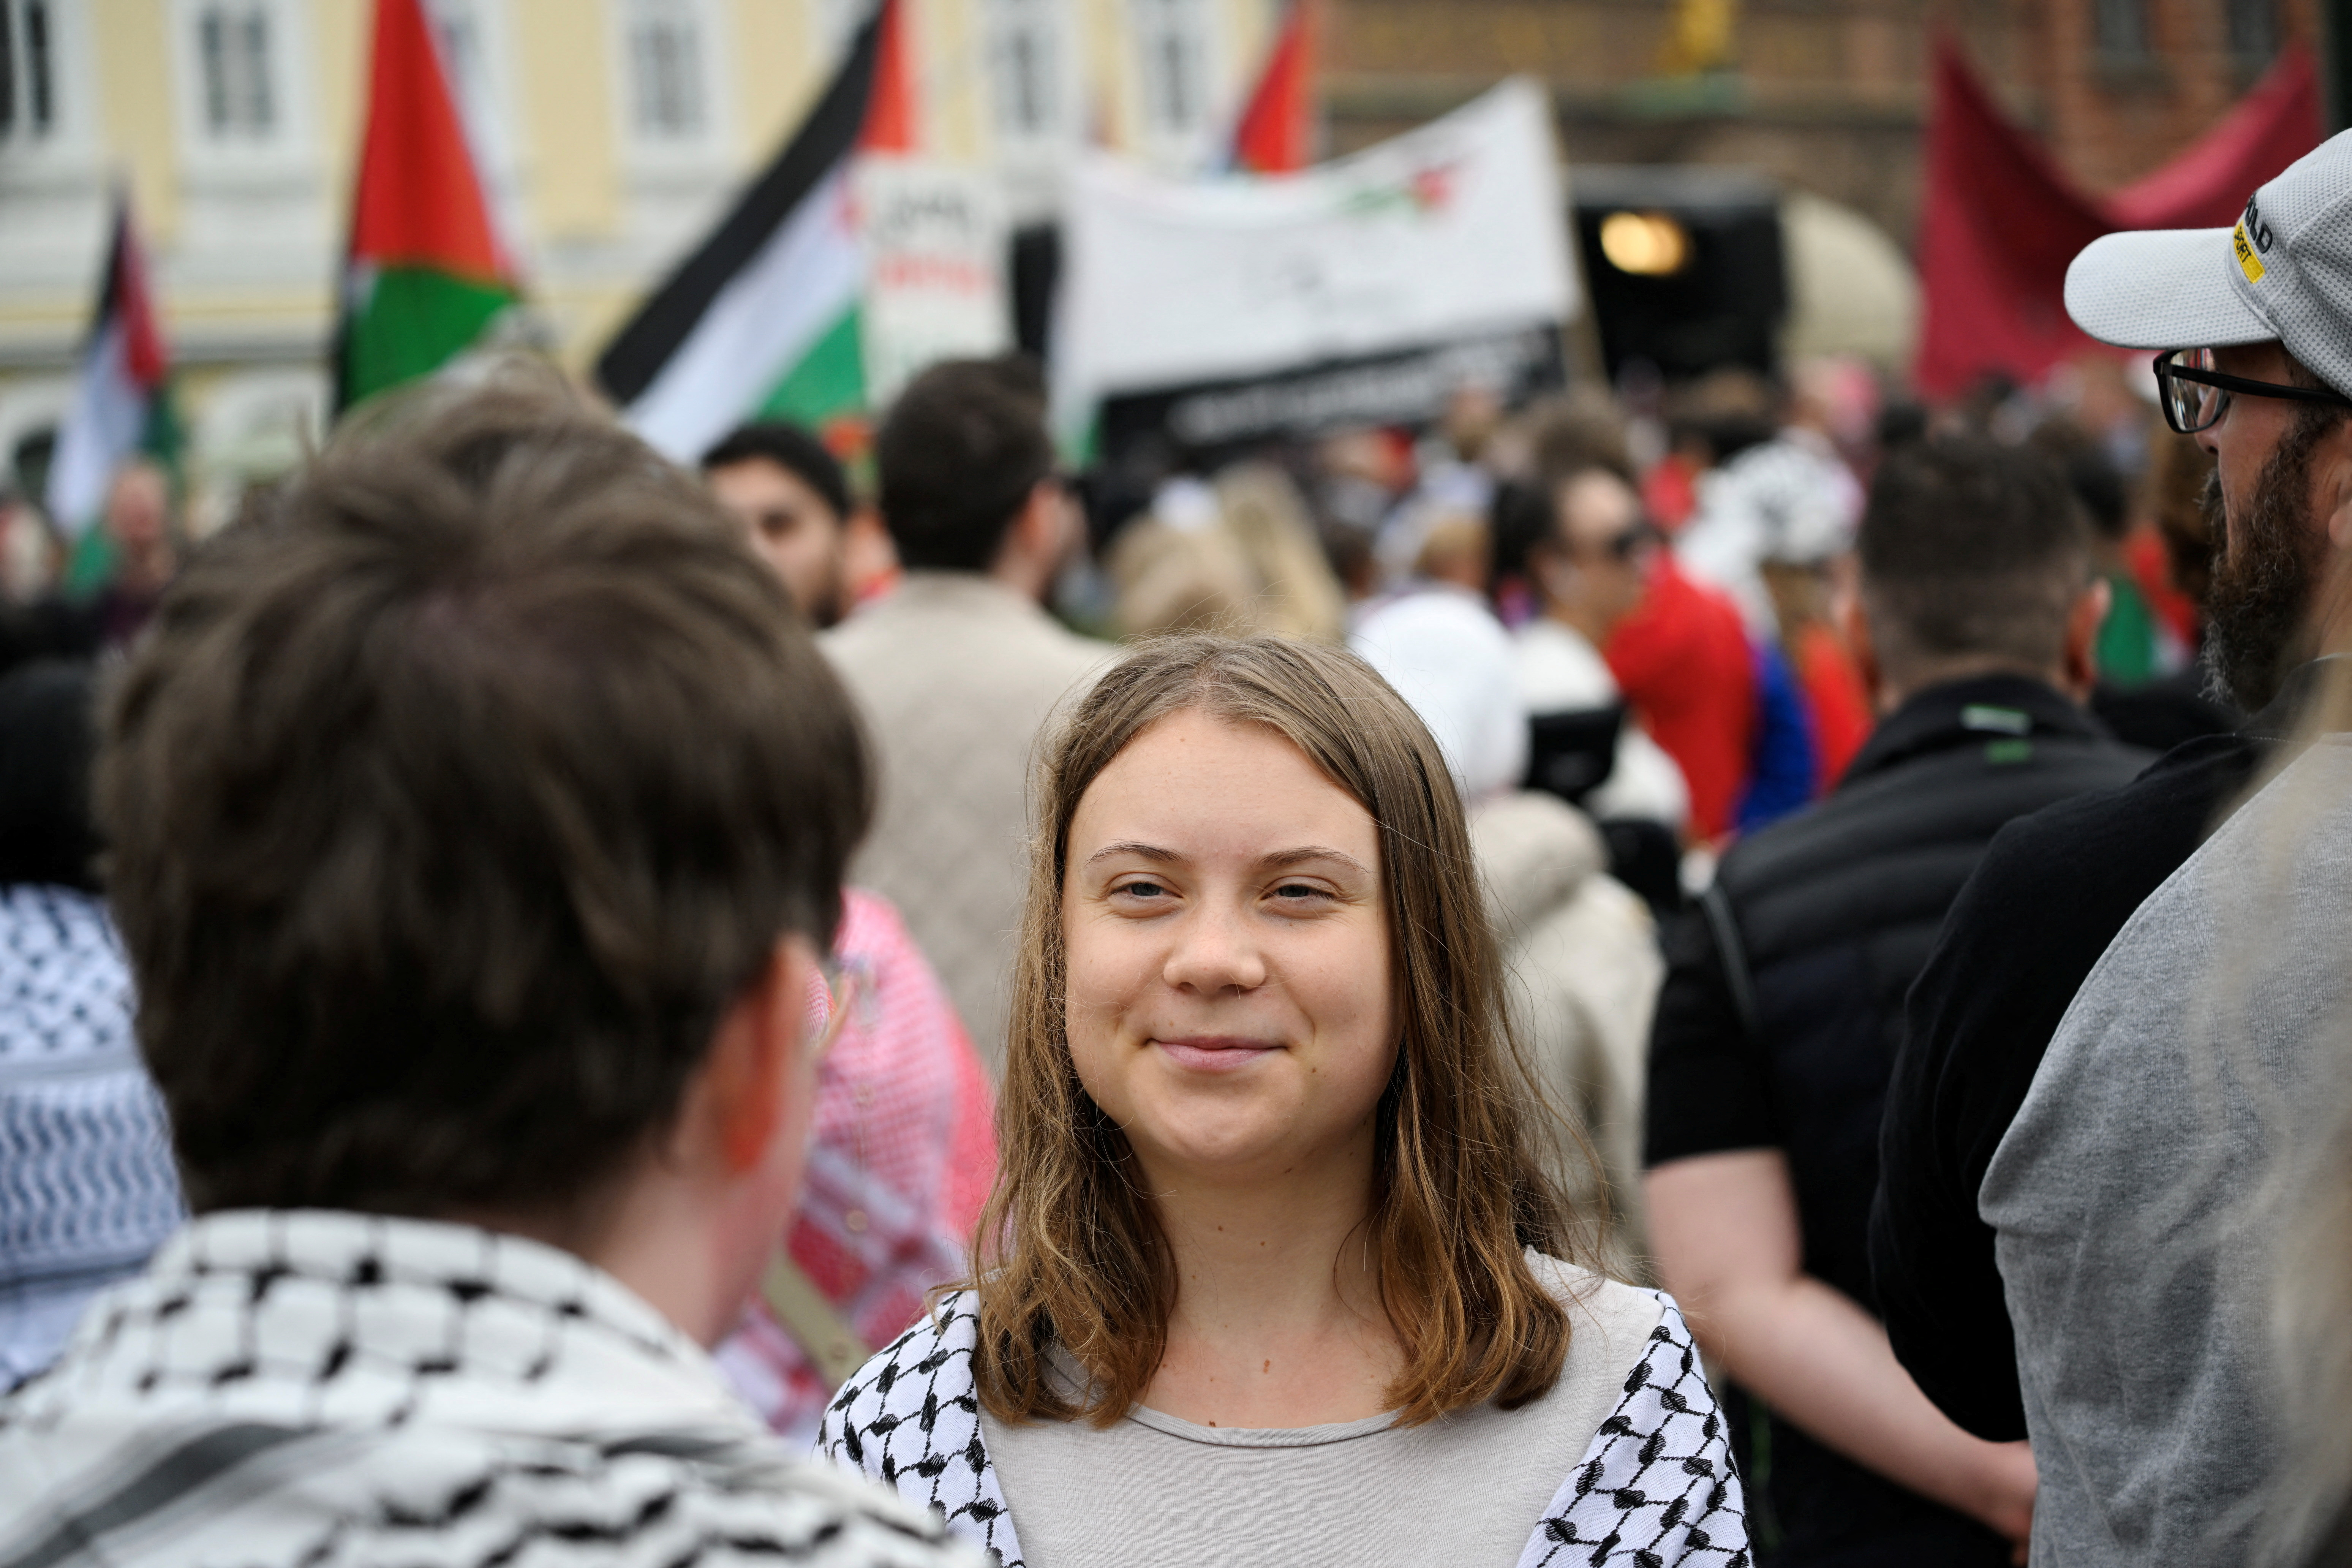 Protest against Israeli participation in the Eurovision Song Contest, in Malmo